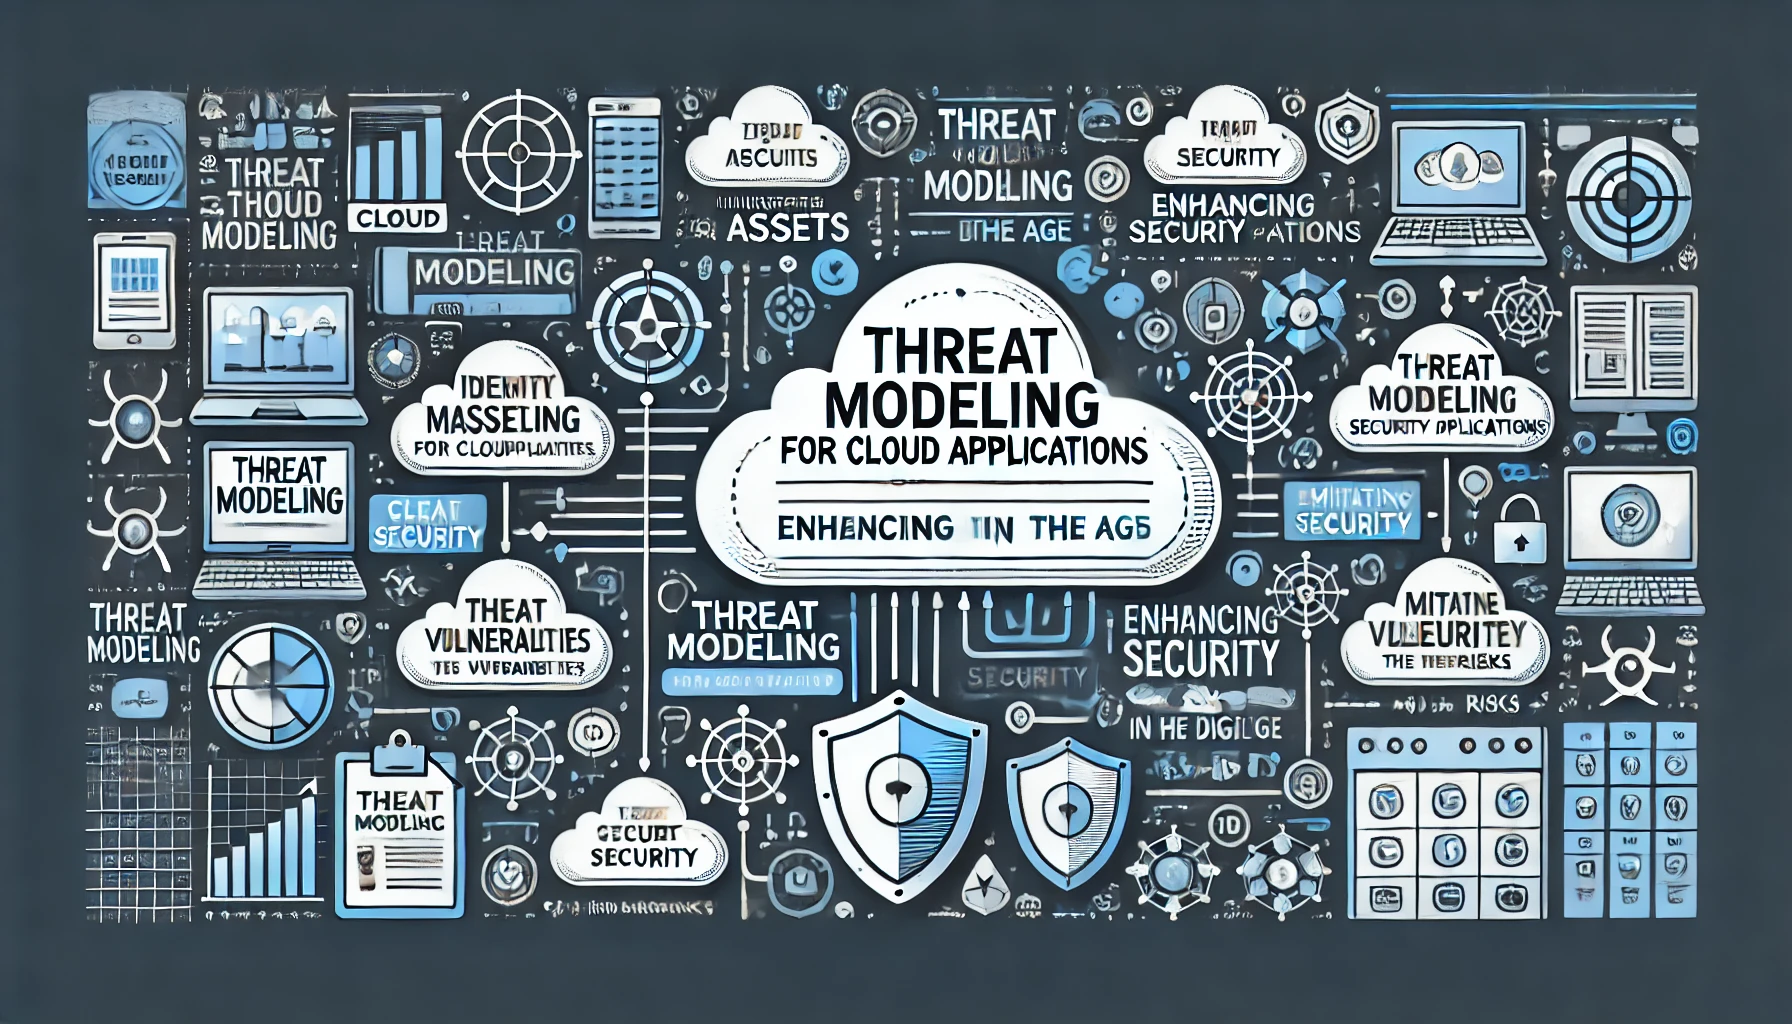 Threat Modeling for Cloud Applications